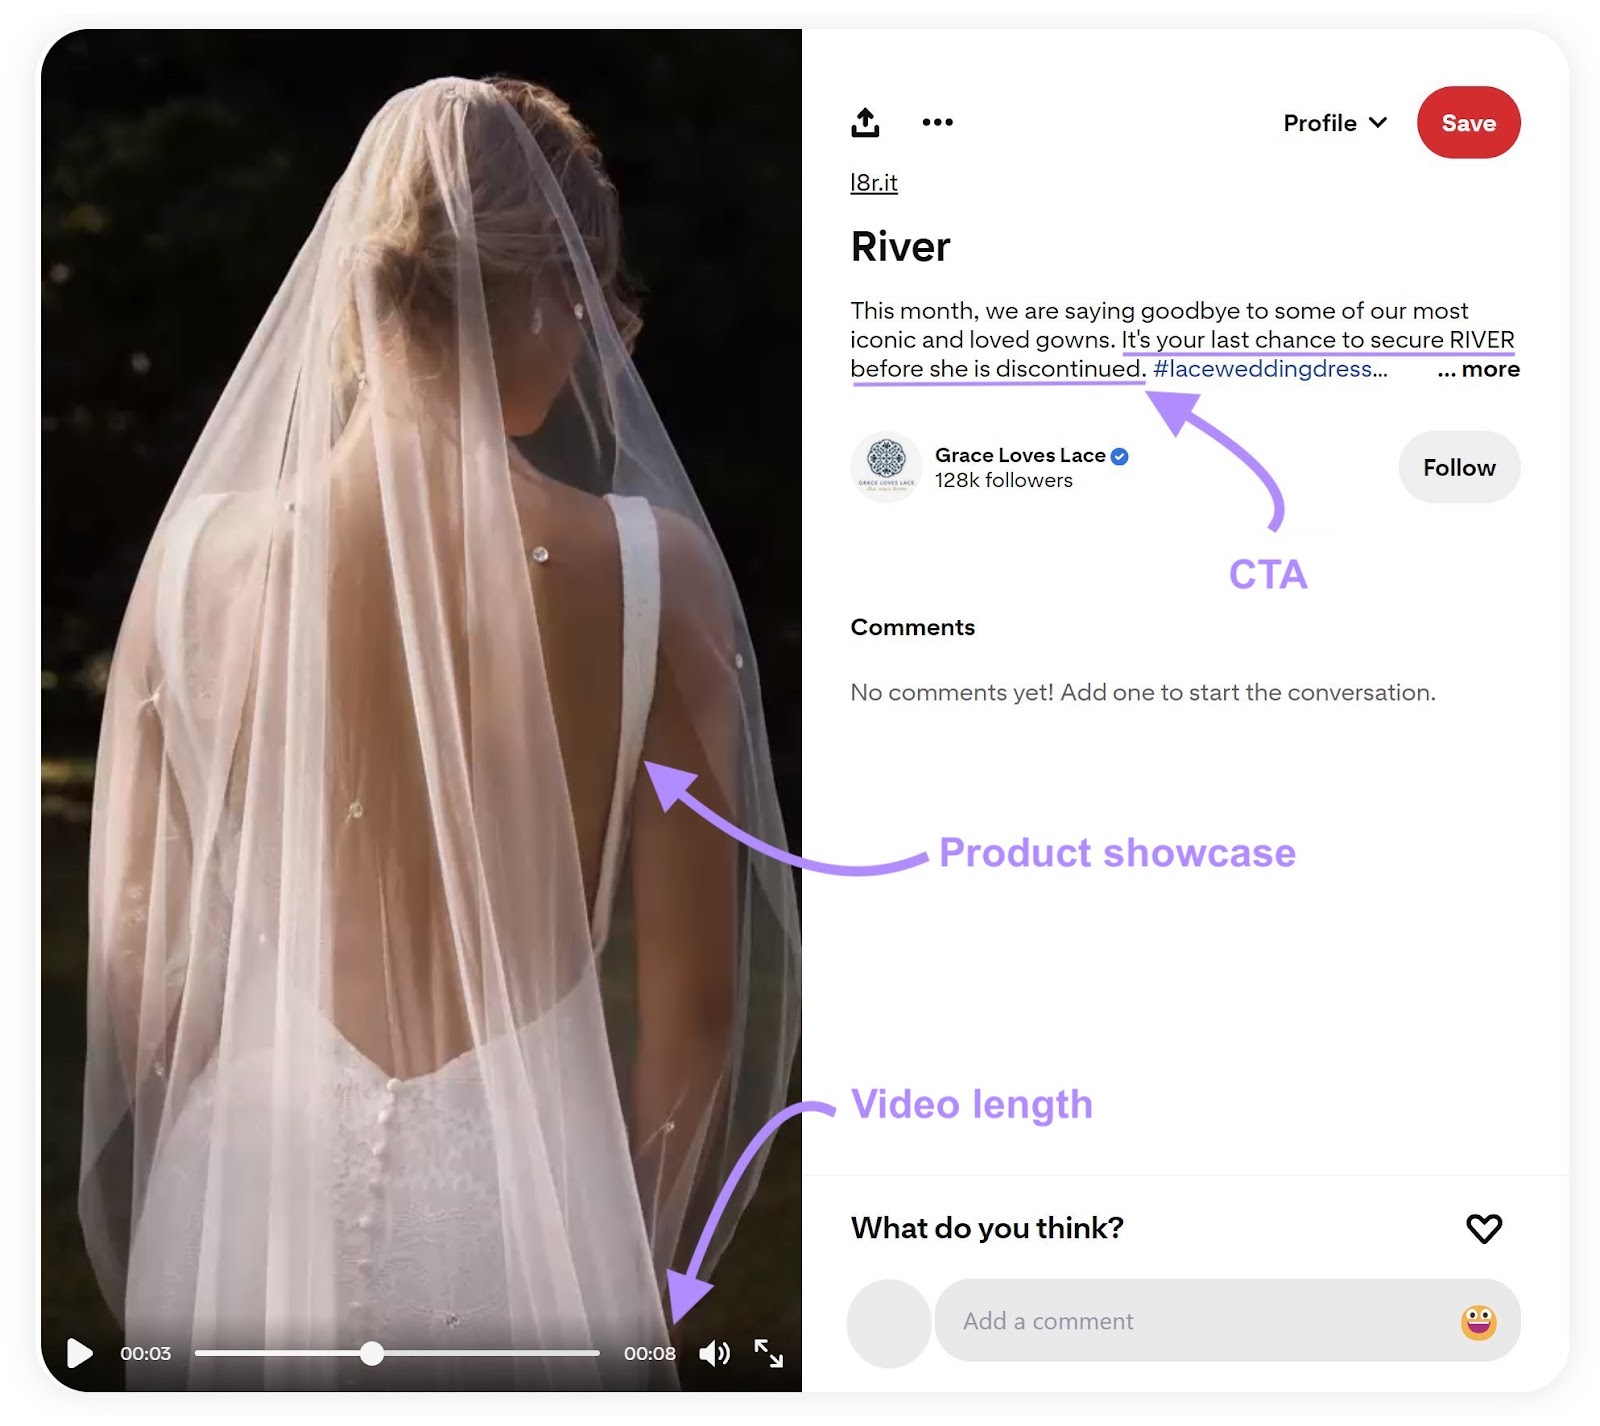 River's Pinterest video with CTA, product showcase, and video length elements marked